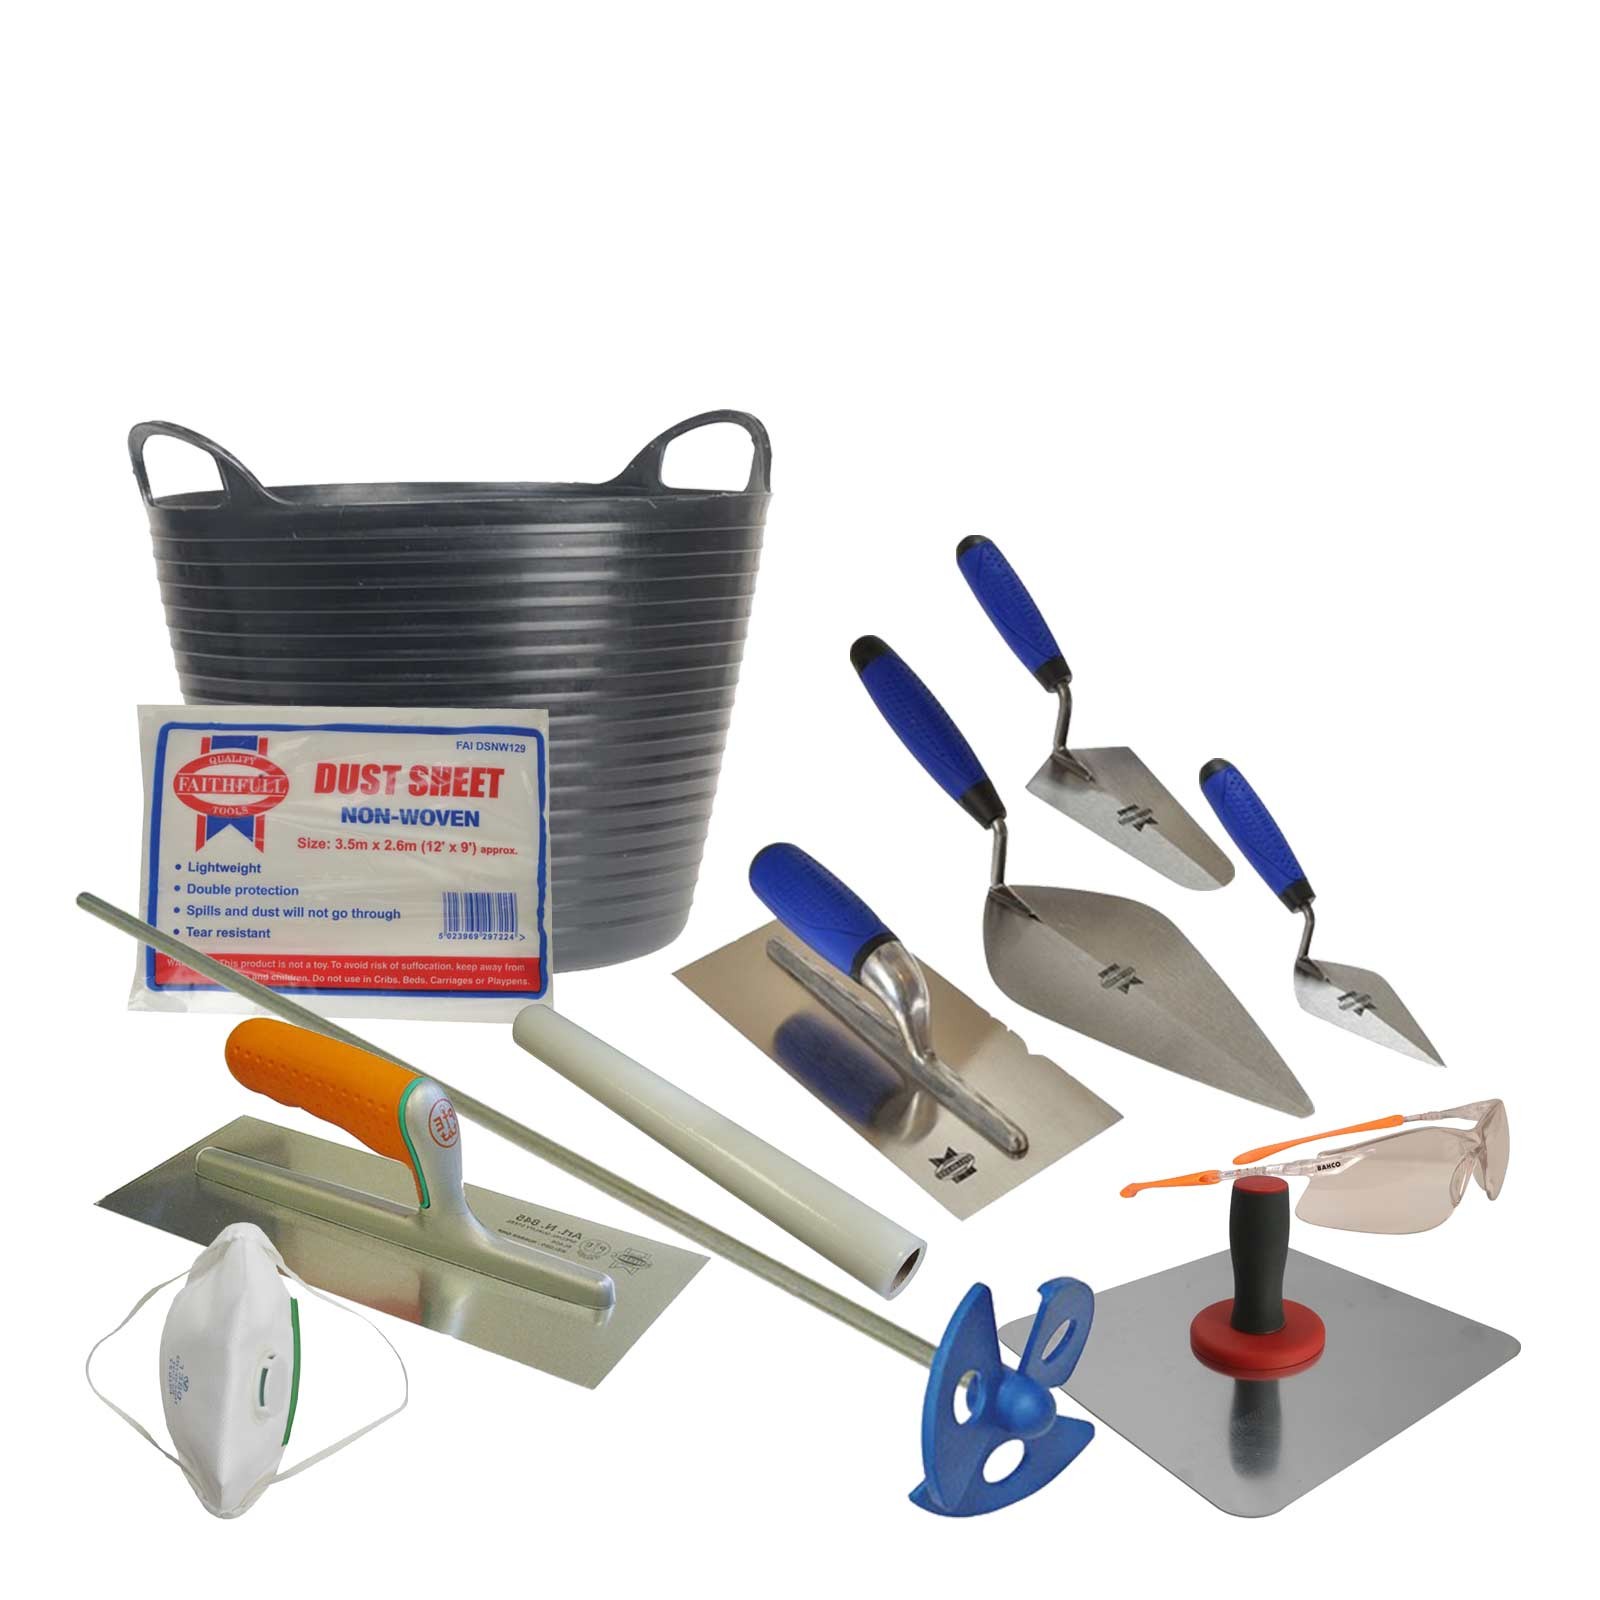 Plasterers Tool Kit Bundle with Complete List of Tools for ...